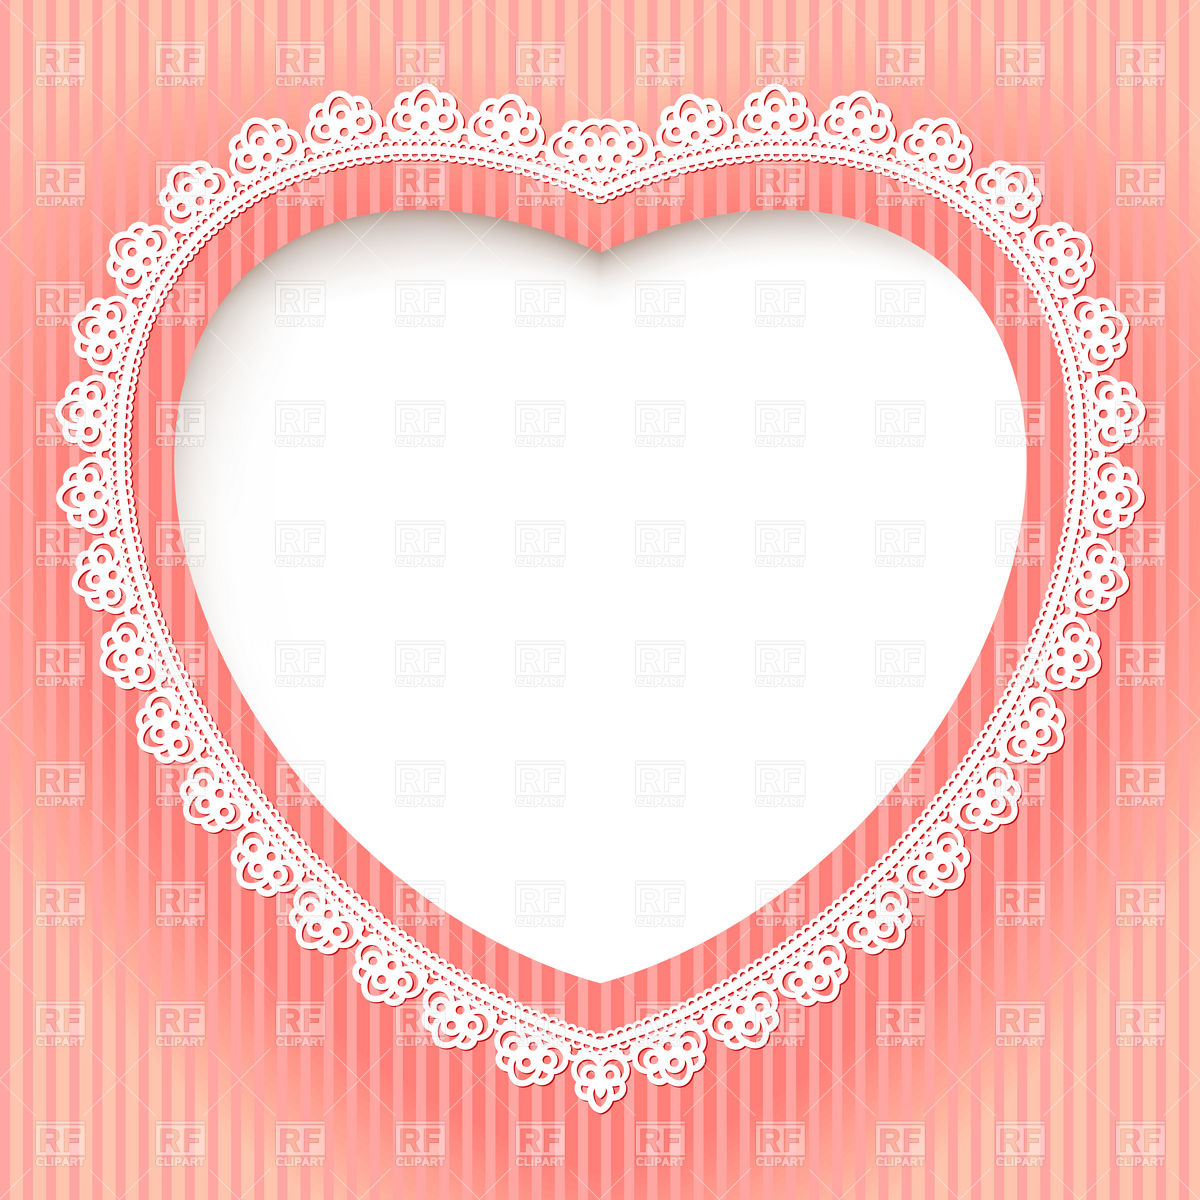 Clipart Catalog Borders And Frames Decorative Heart Shaped Lace Frame